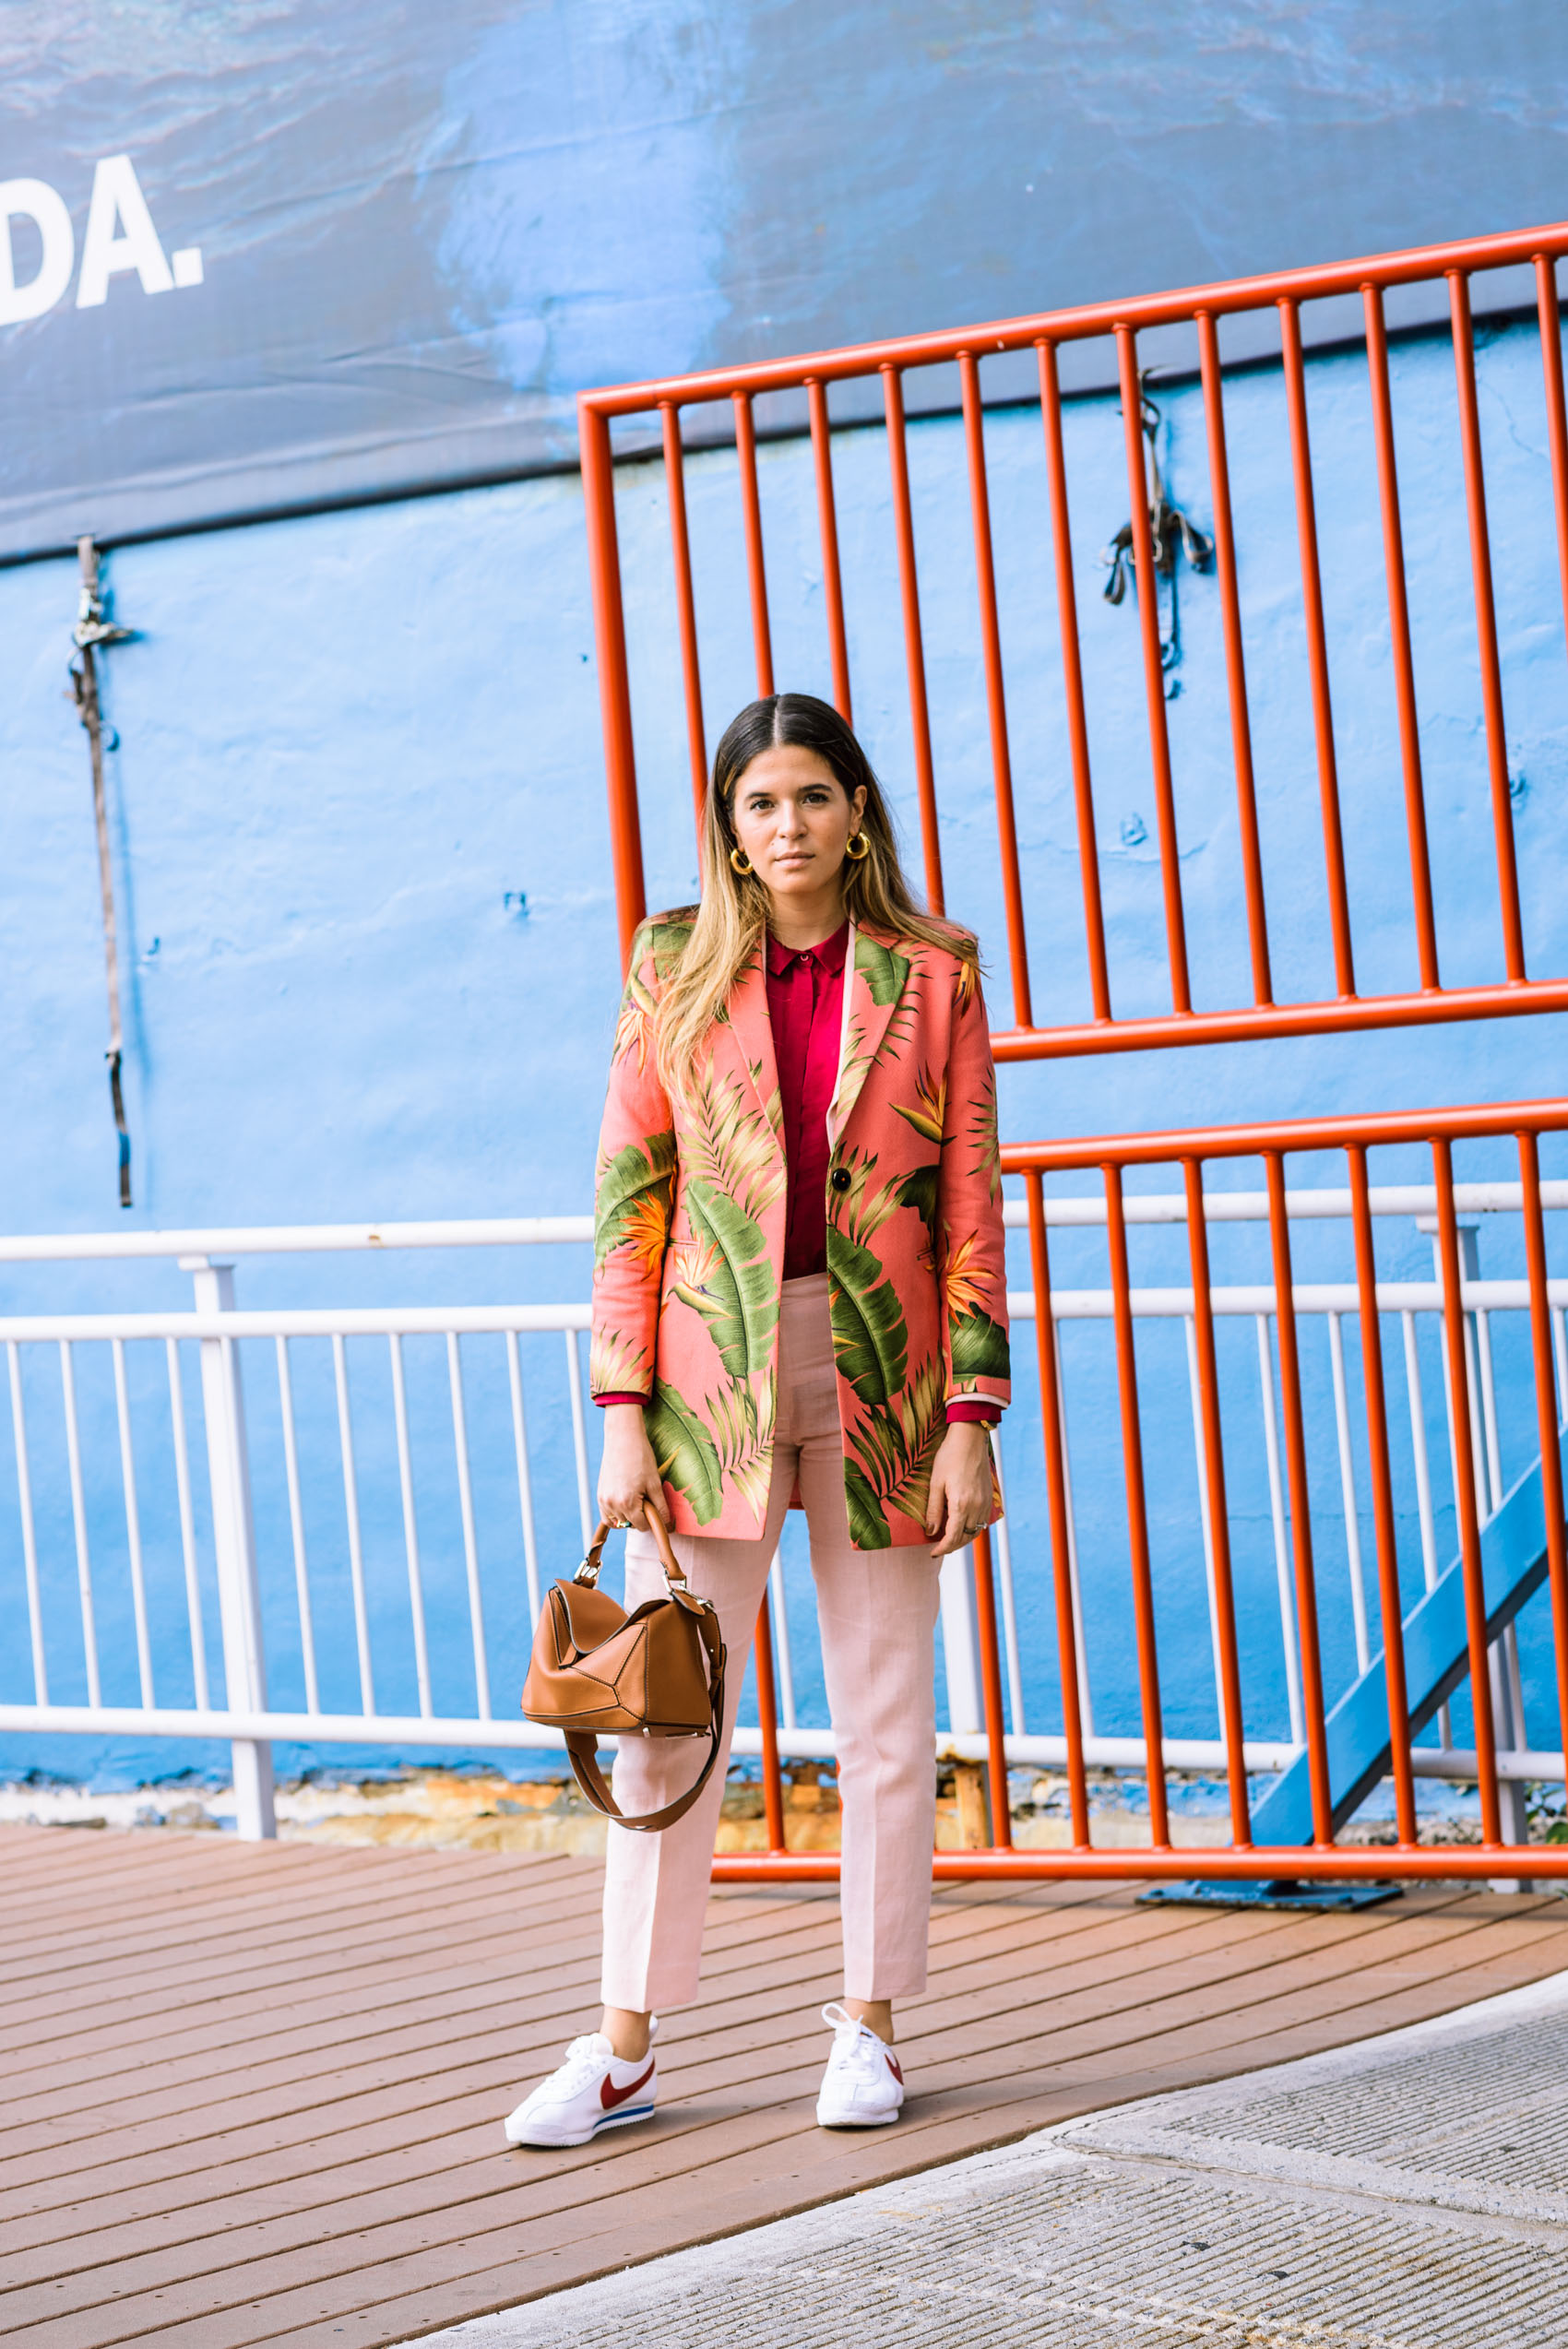 Maristella outside the Piers at NYFW wearing a printed suit jacket from Latin American label Atelier Crump